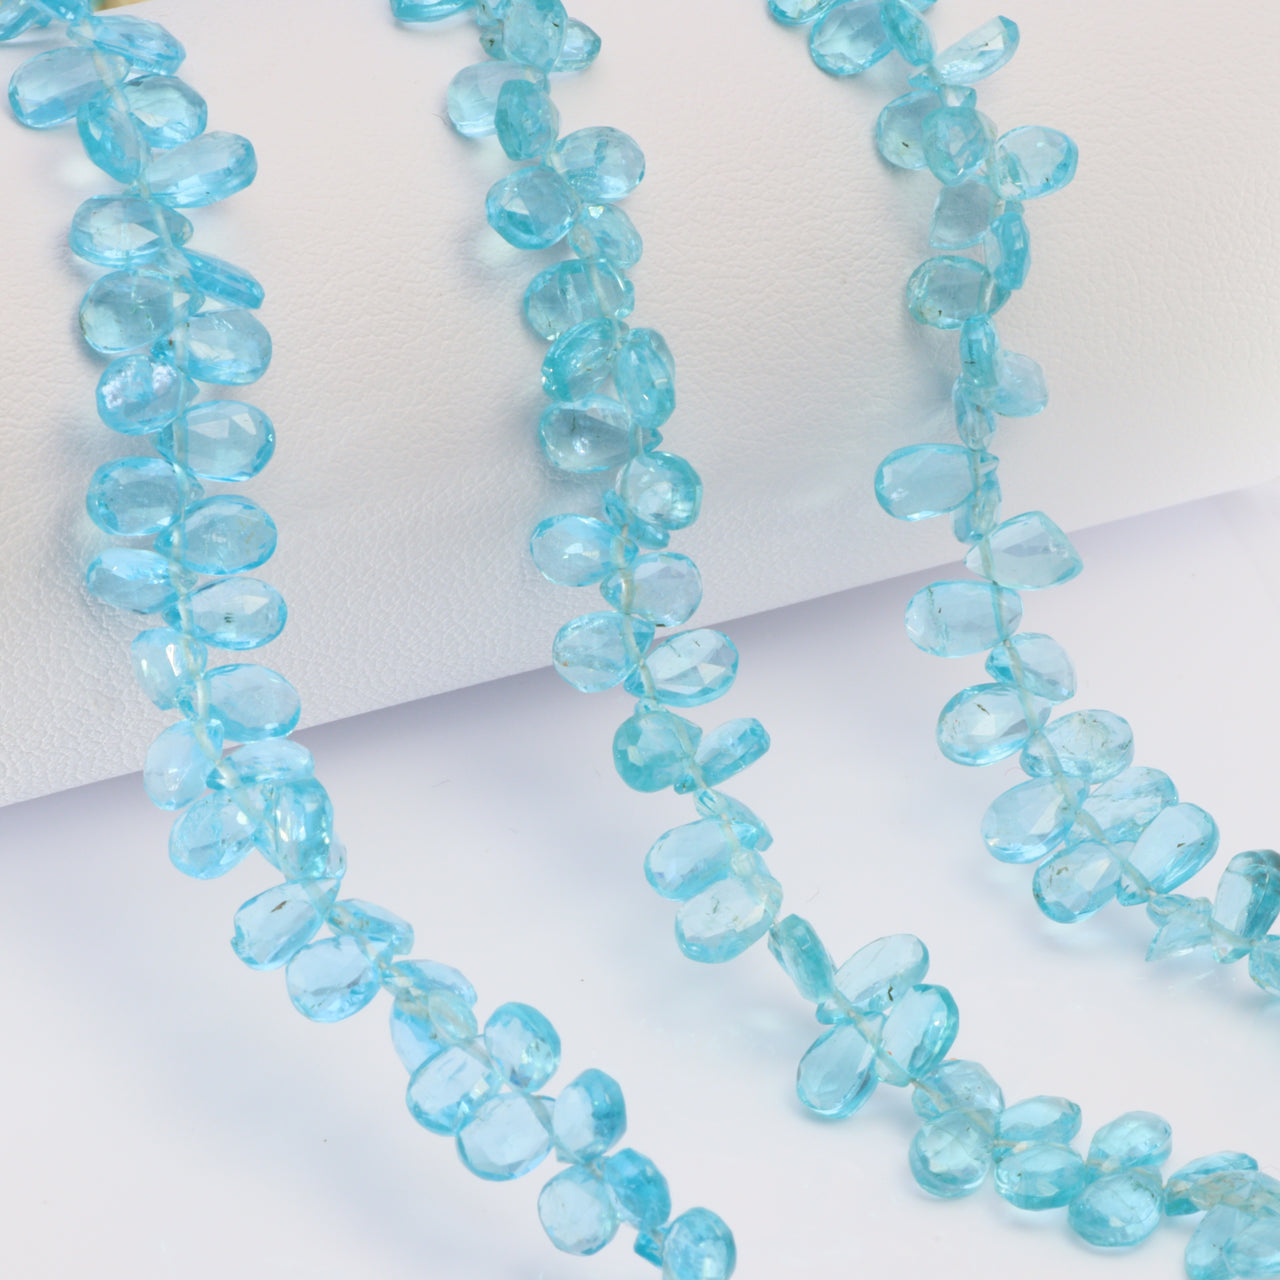 Sea Blue Apatite 6x4mm Faceted Pear Shaped Briolettes